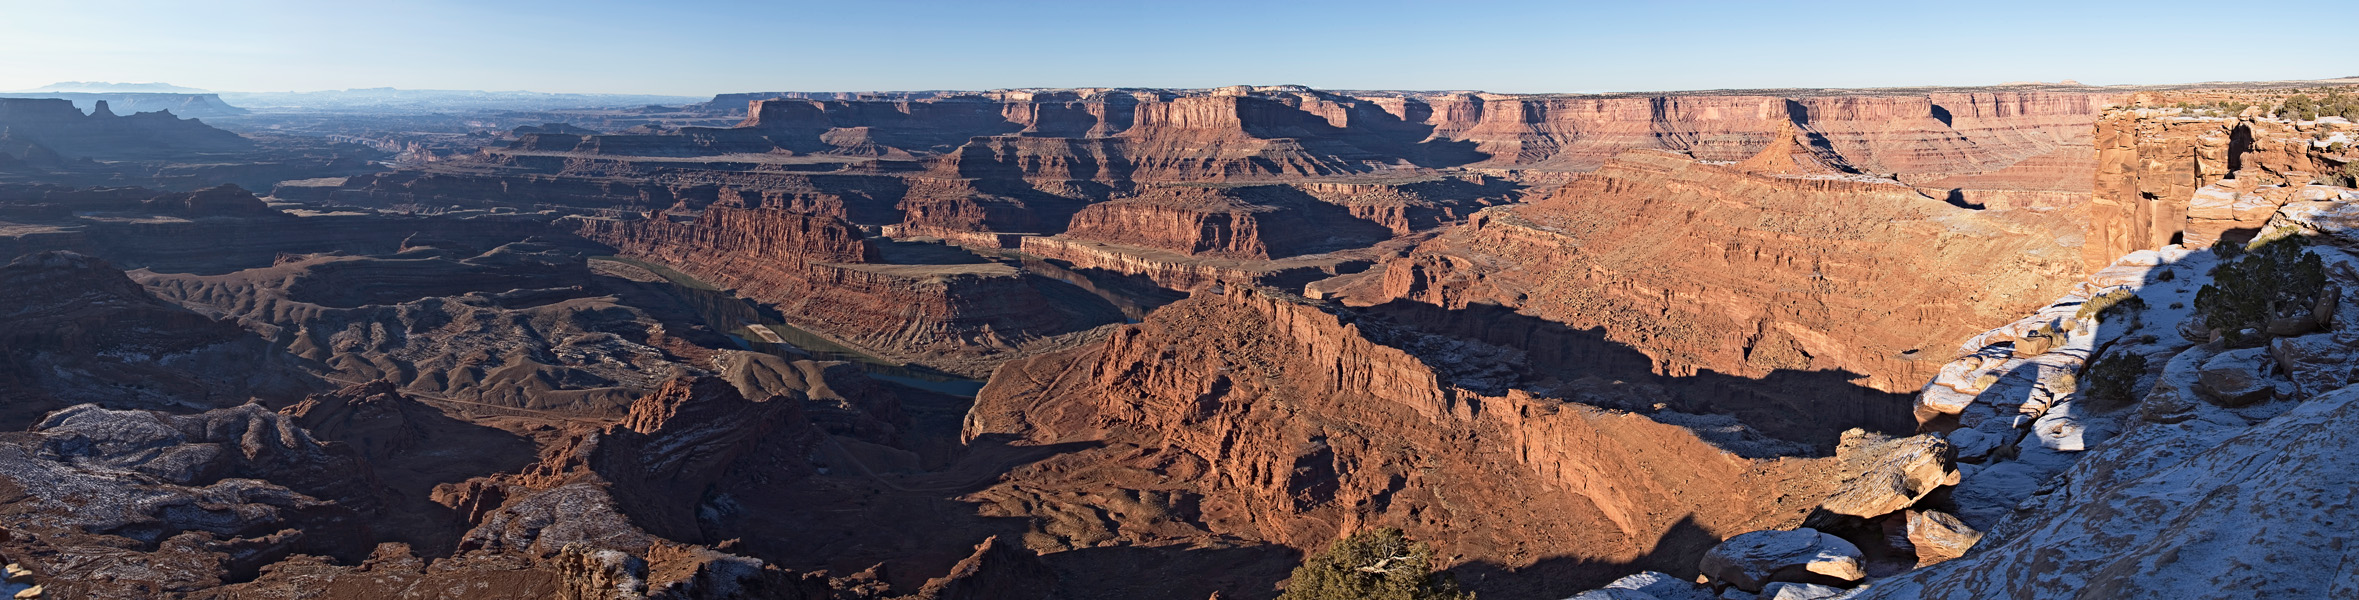 Dead Horse Point_3